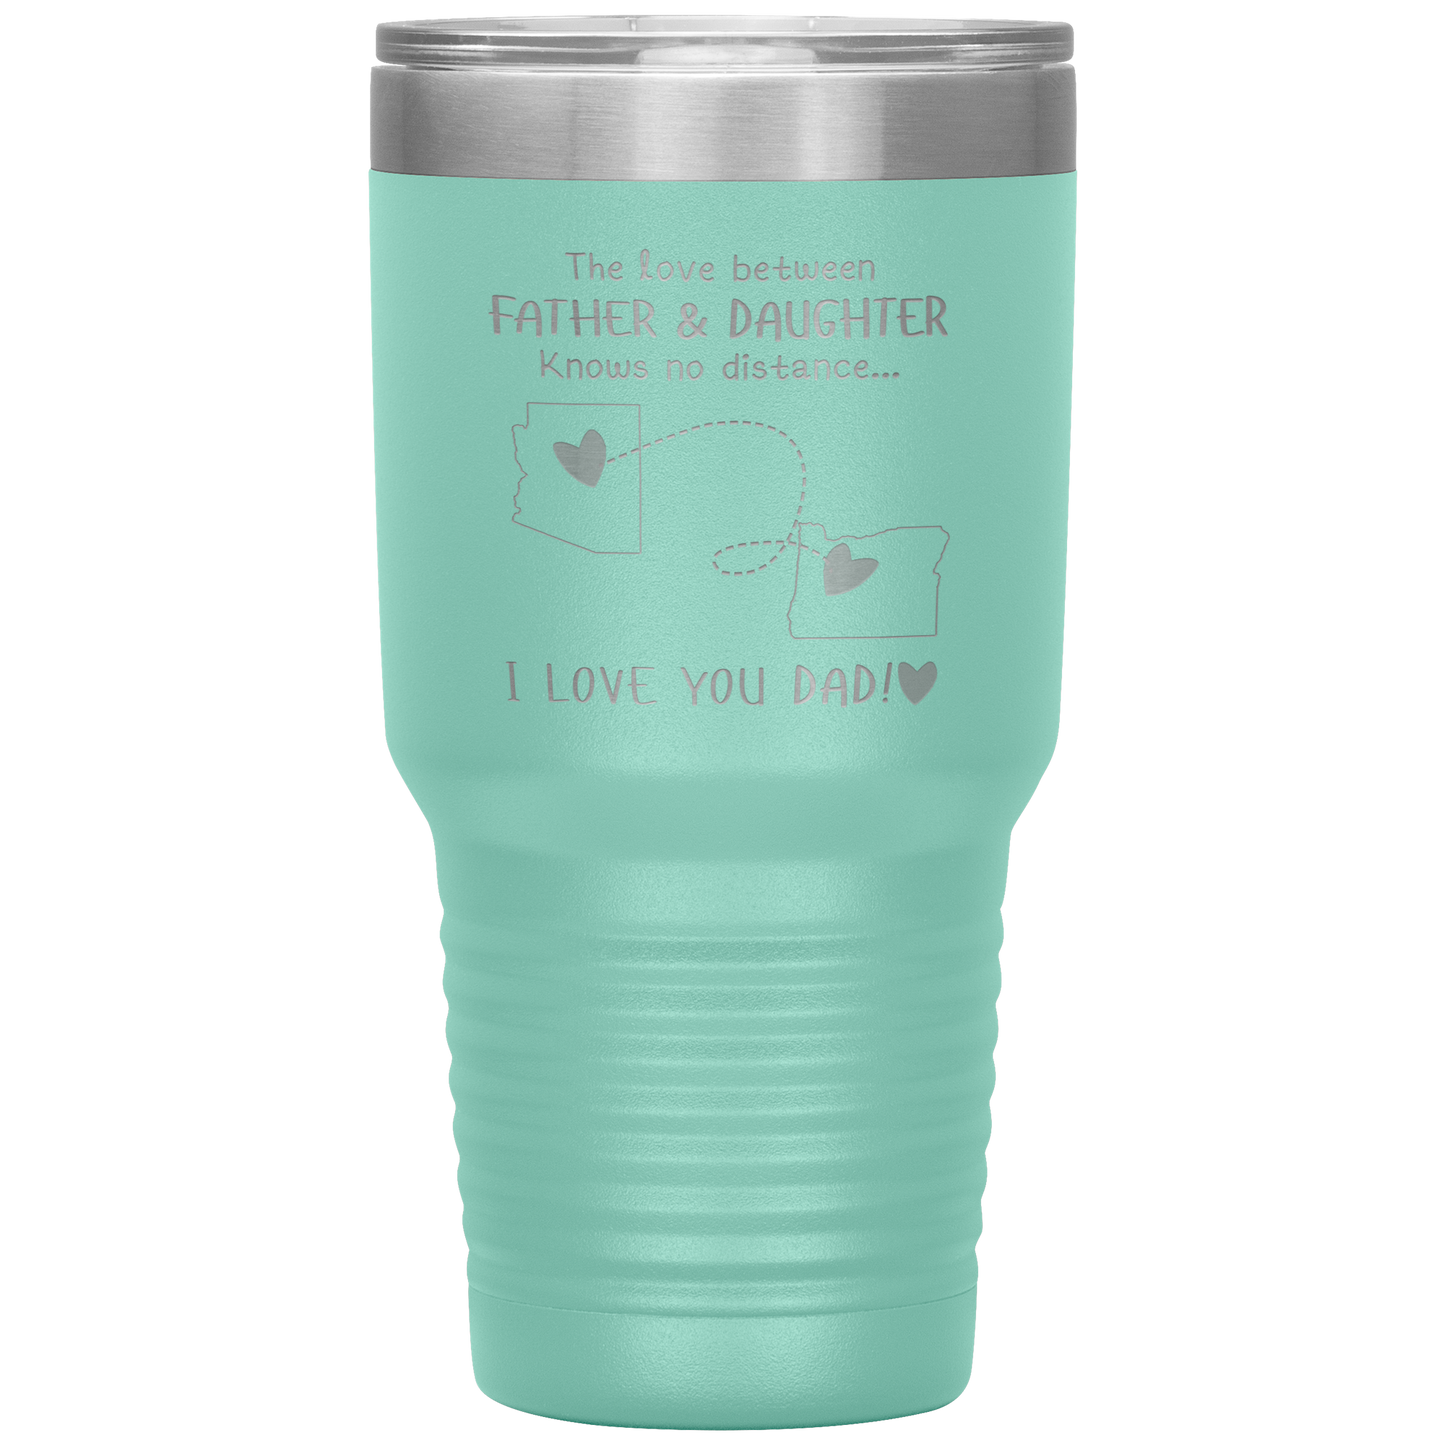 HNV-CUS-GRAND-sp-41874 - [ Arizona | Oregon ] (Tumbler_30oz) Mother Day Gifts Personalized Mothers Day Gifts Coffee Mug